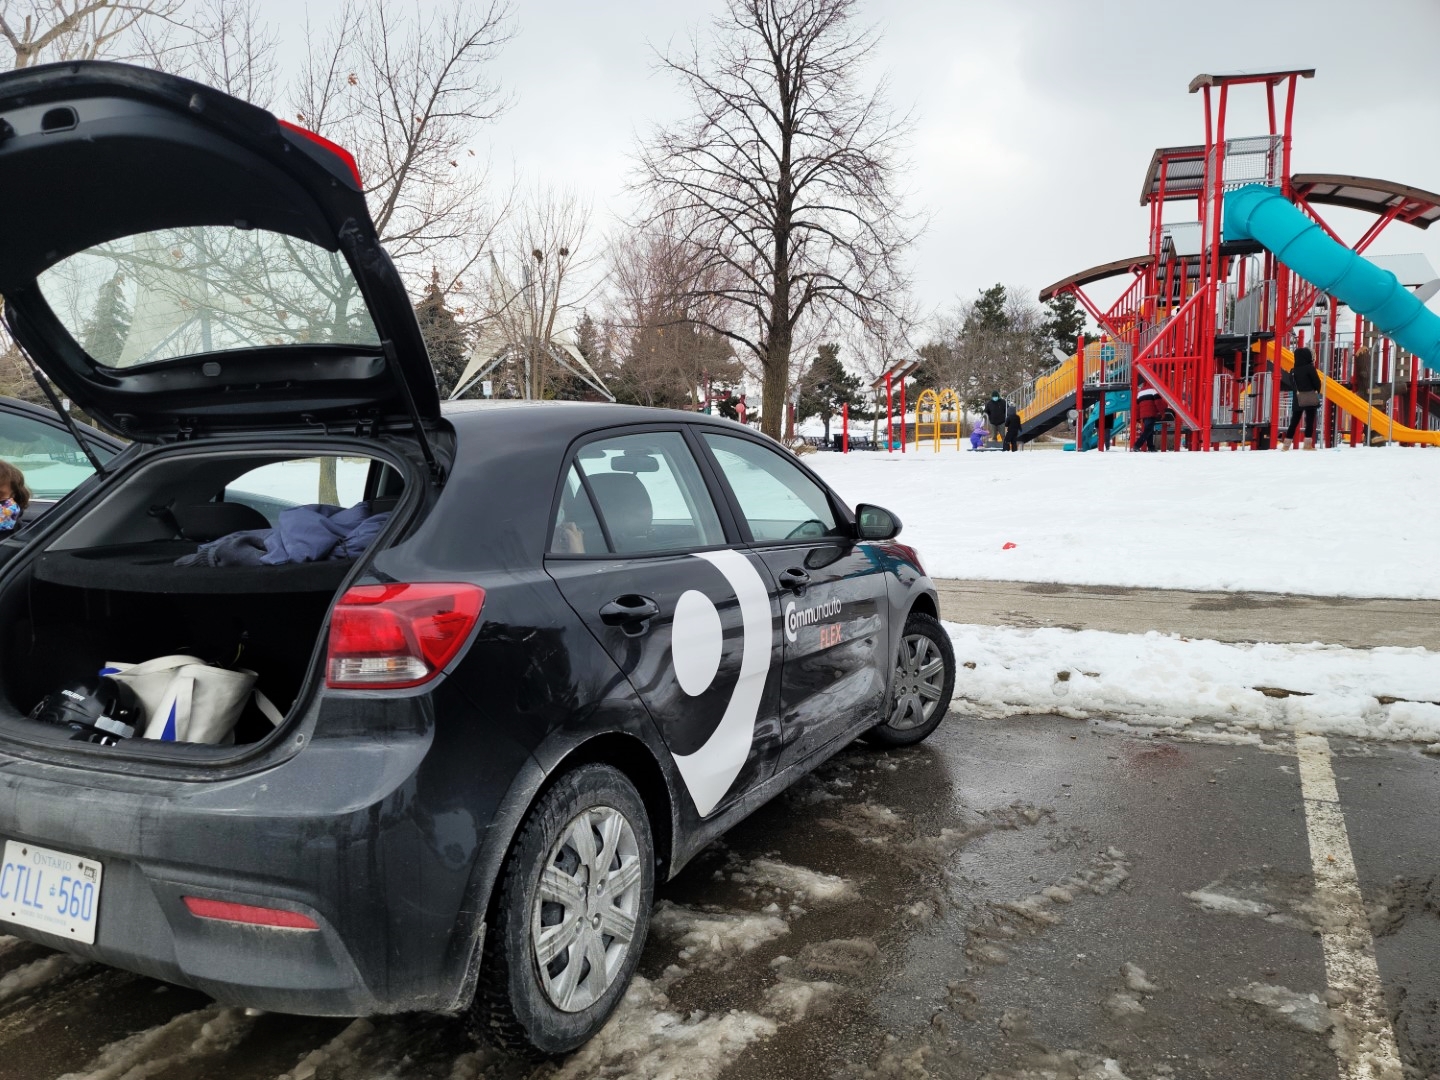 Communauto car share with trunk open in snow